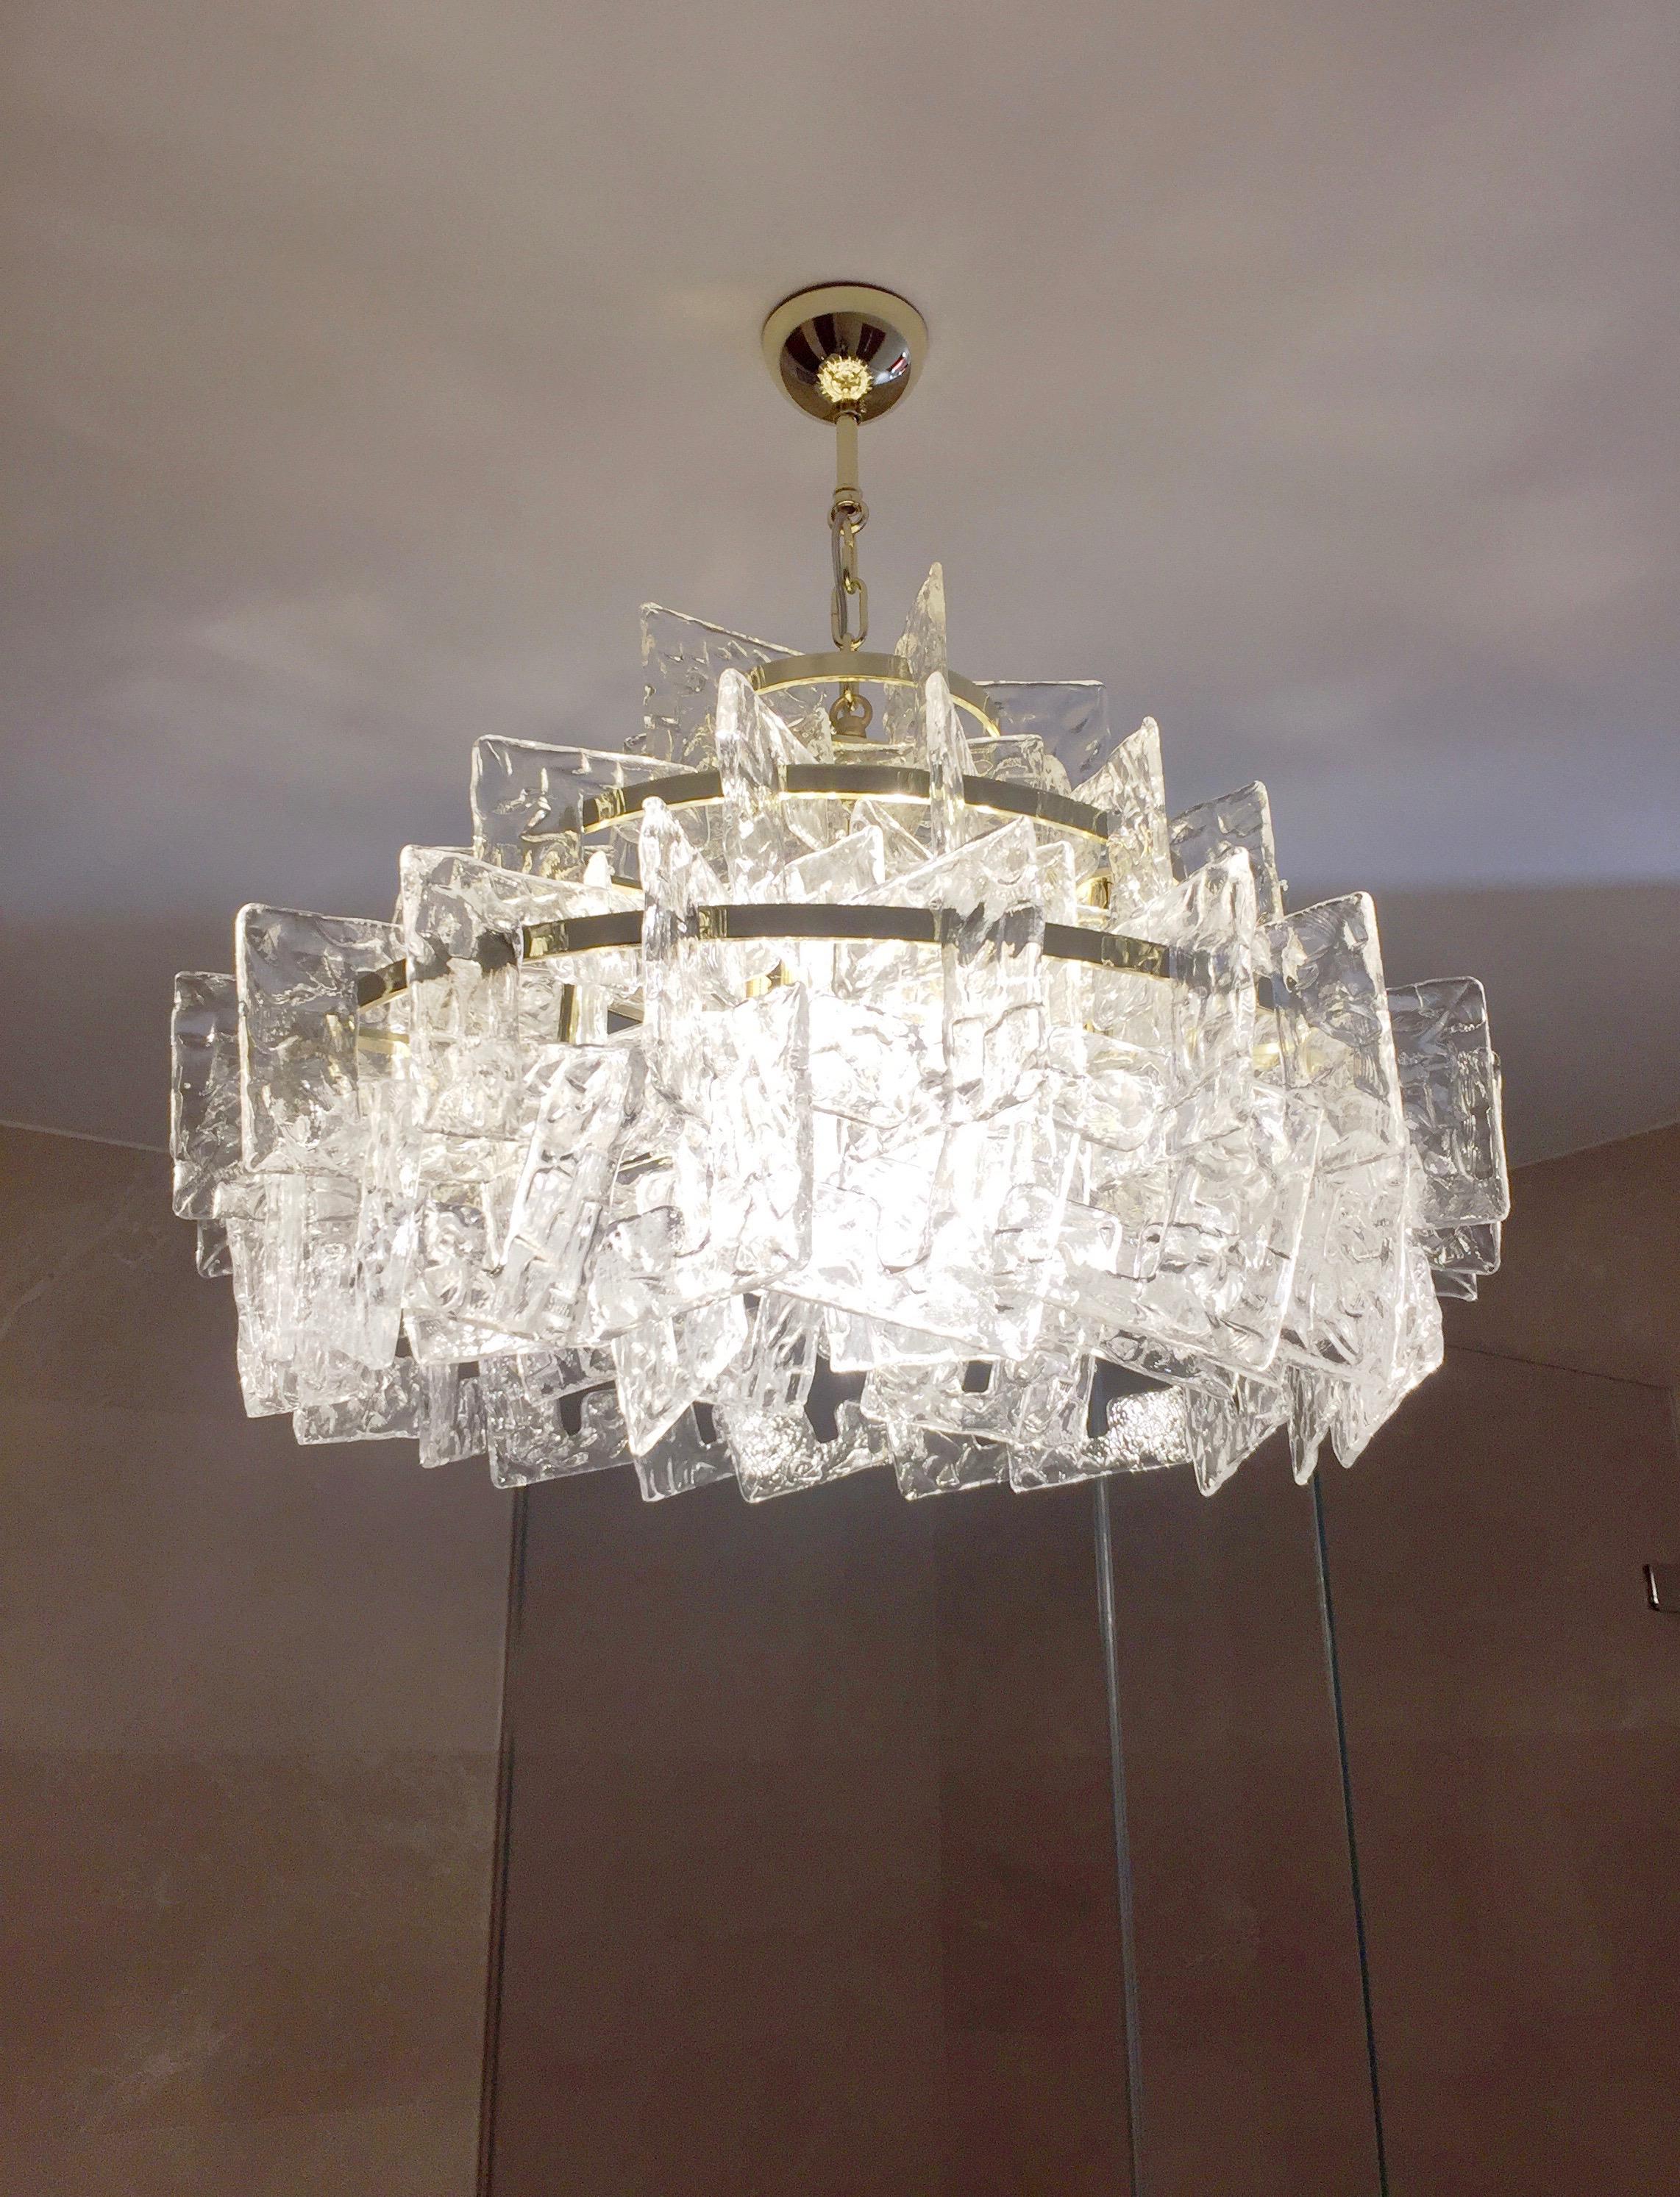 A Venetian very elegant bespoke chandelier, entirely handcrafted in Italy. The handmade 3-tier structure in gold brass presents an organic mesh modern decor with a couture interlaced design composed of sophisticated interlocking links in crystal